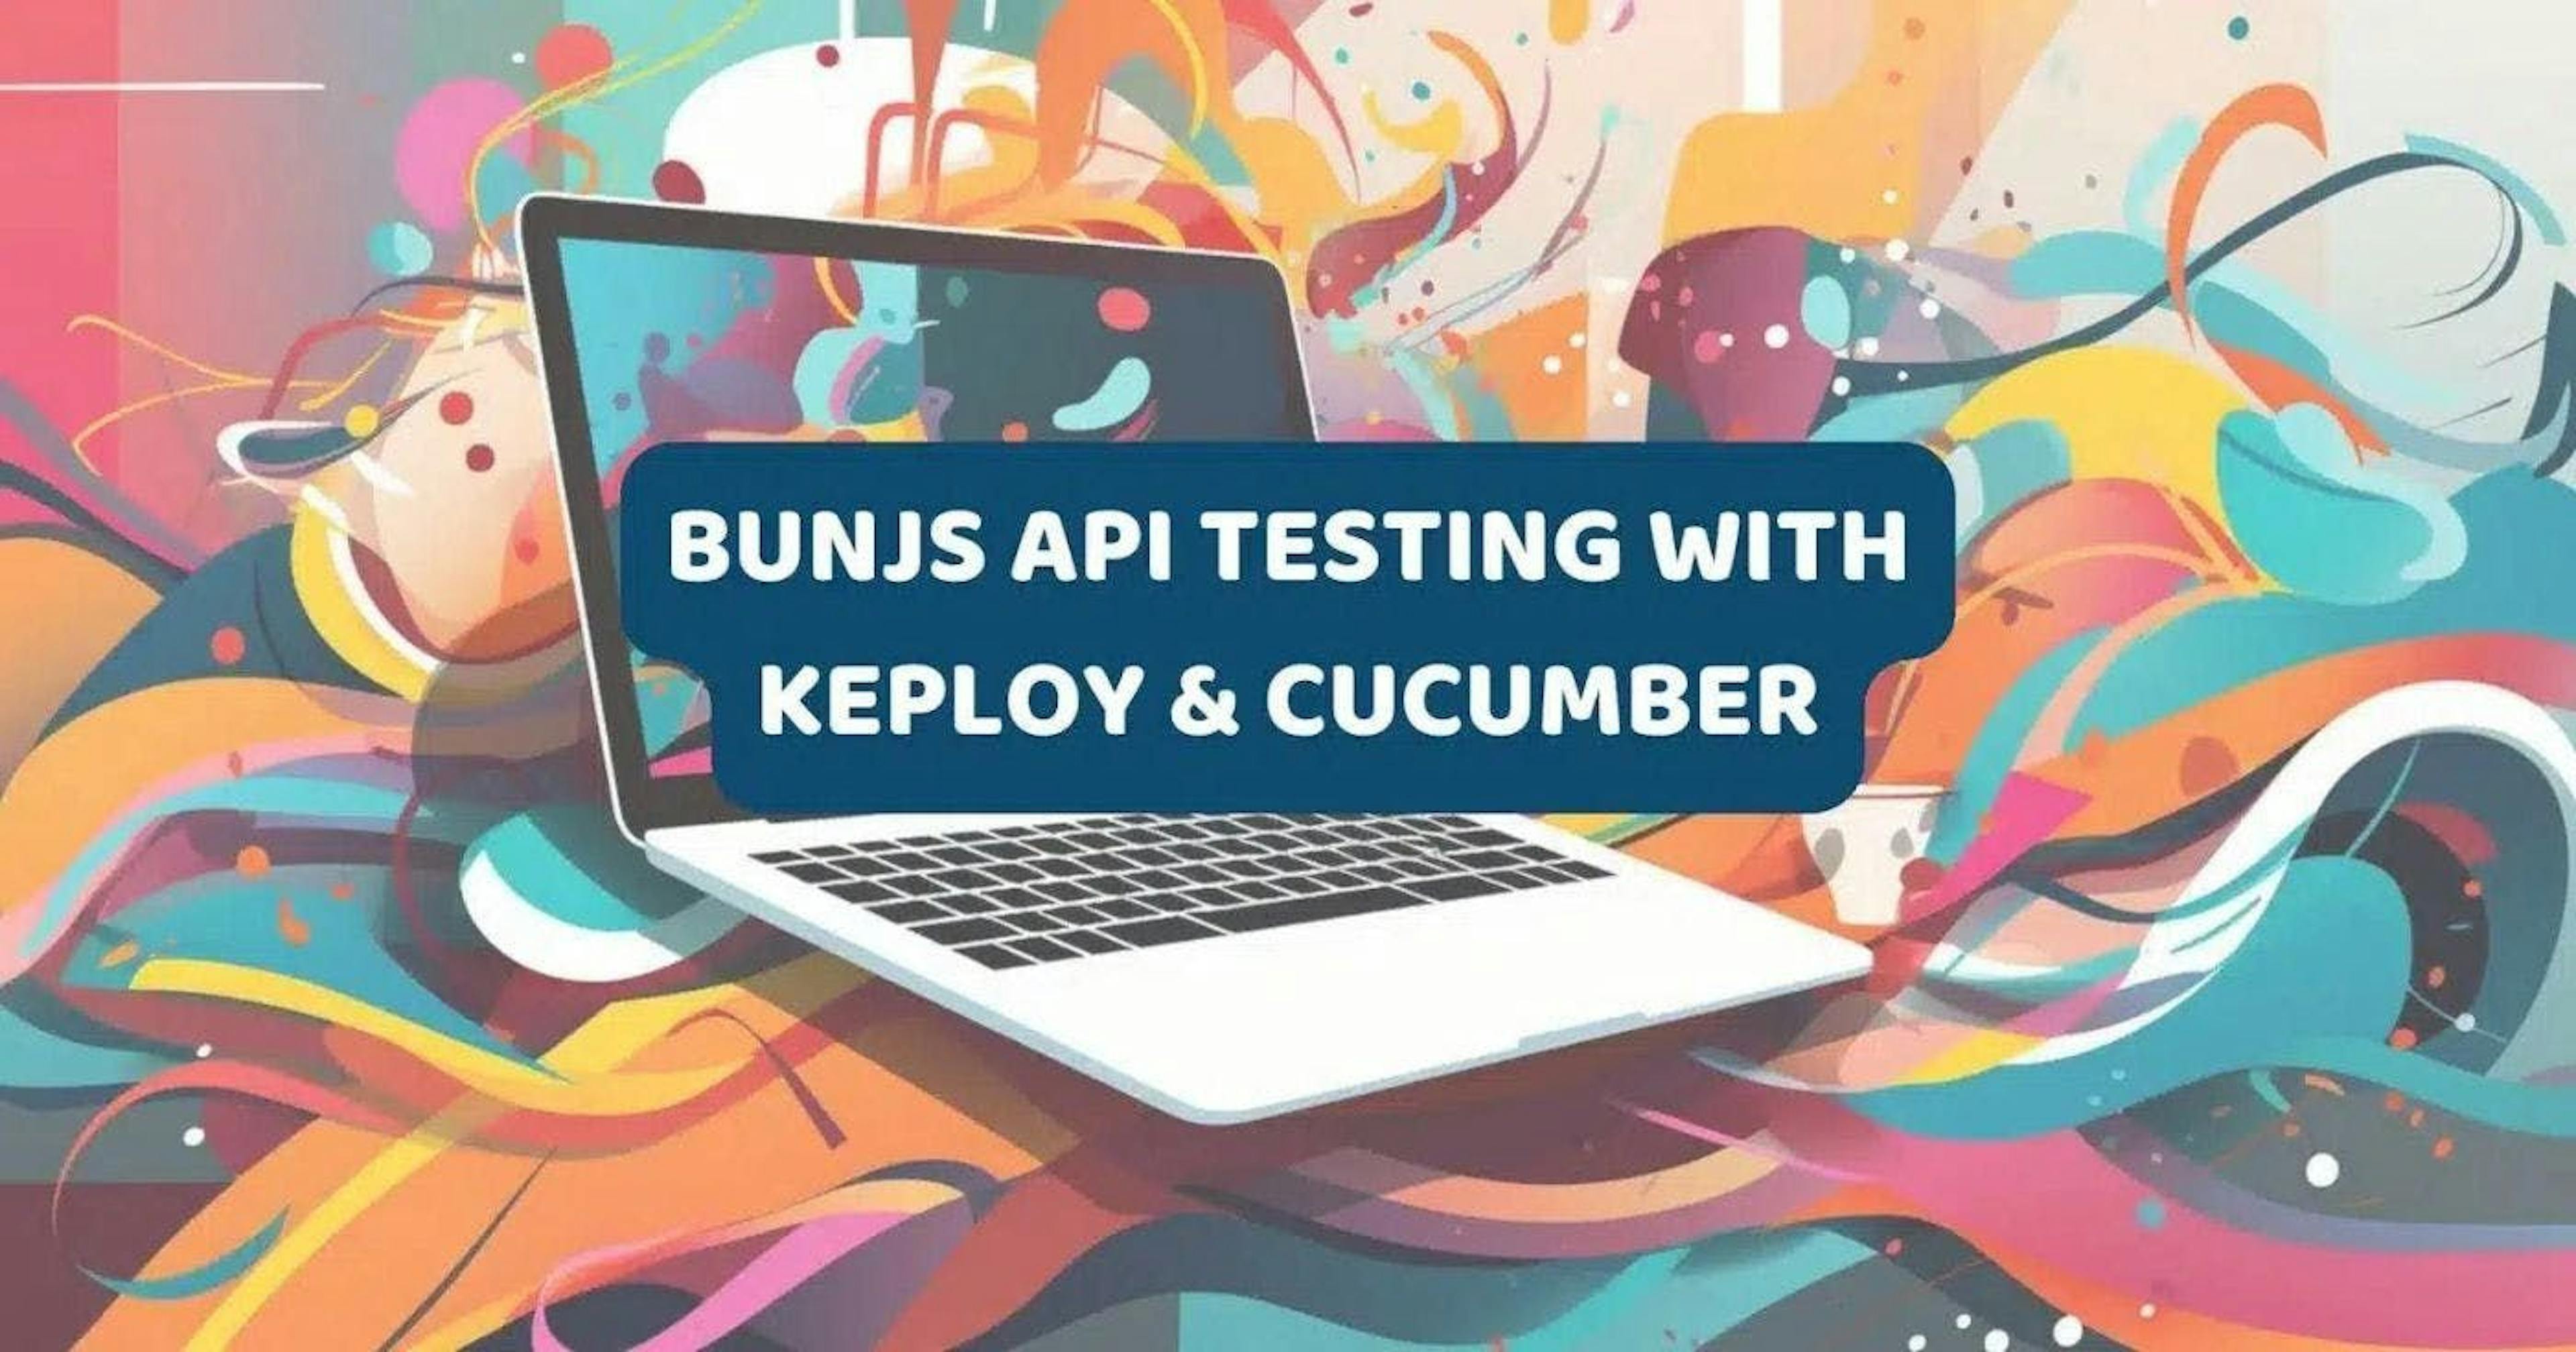 featured image - Ensuring Quality in BunJs Applications: Testing with Cucumber JS and Keplo